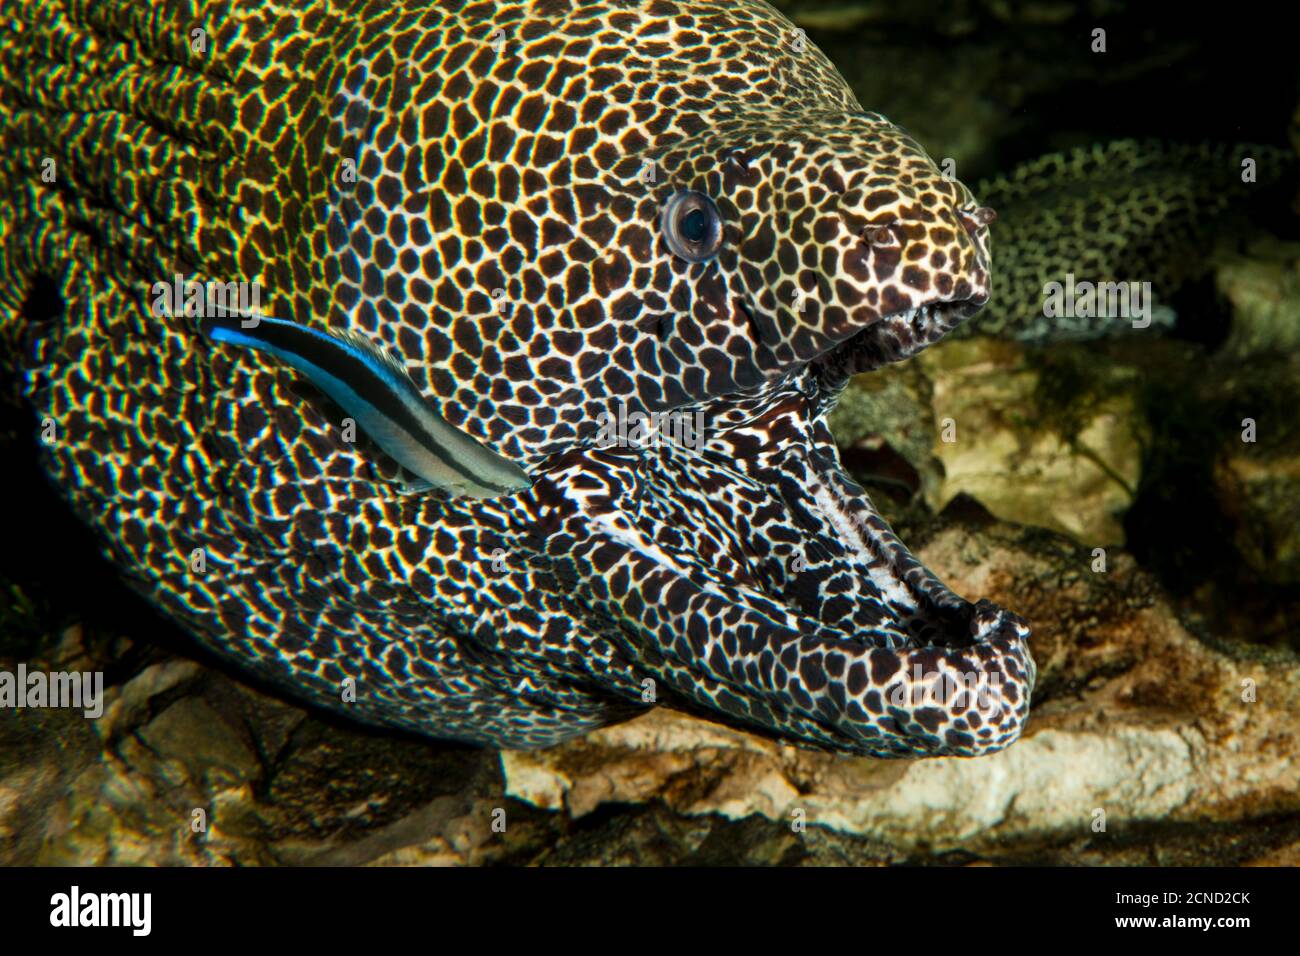 Honeycomb Moray Eel, gymnothorax favagineus, Adult with Open Mouth, with a Bluestreak Cleaner Wrasse, labroides dimidiatus, South Africa Stock Photo